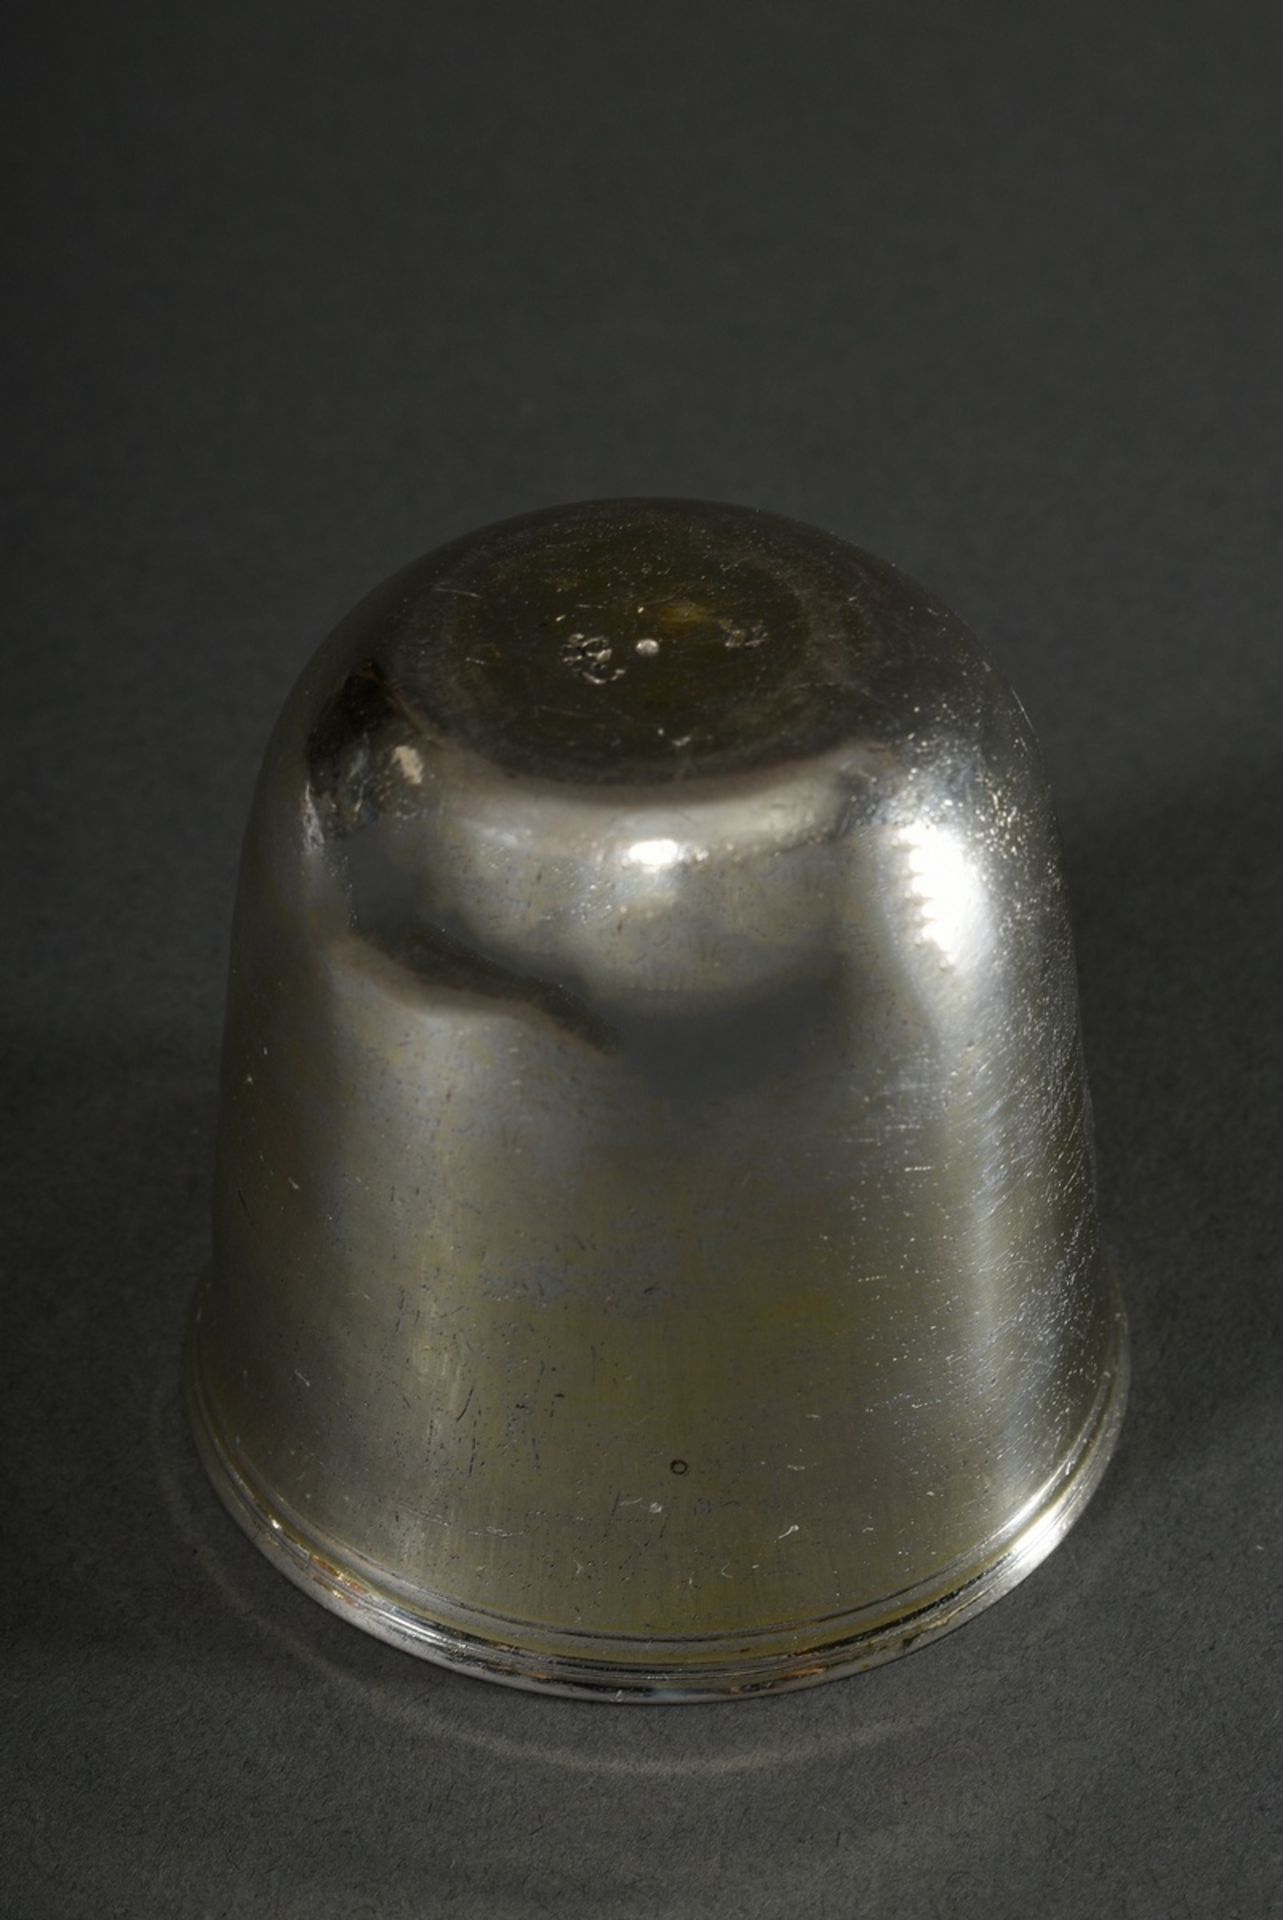 Strasbourg fist cup in simple bell shape with grooved rim, MZ: Johann Jakob Lung, Strasbourg 1749/5 - Image 2 of 4